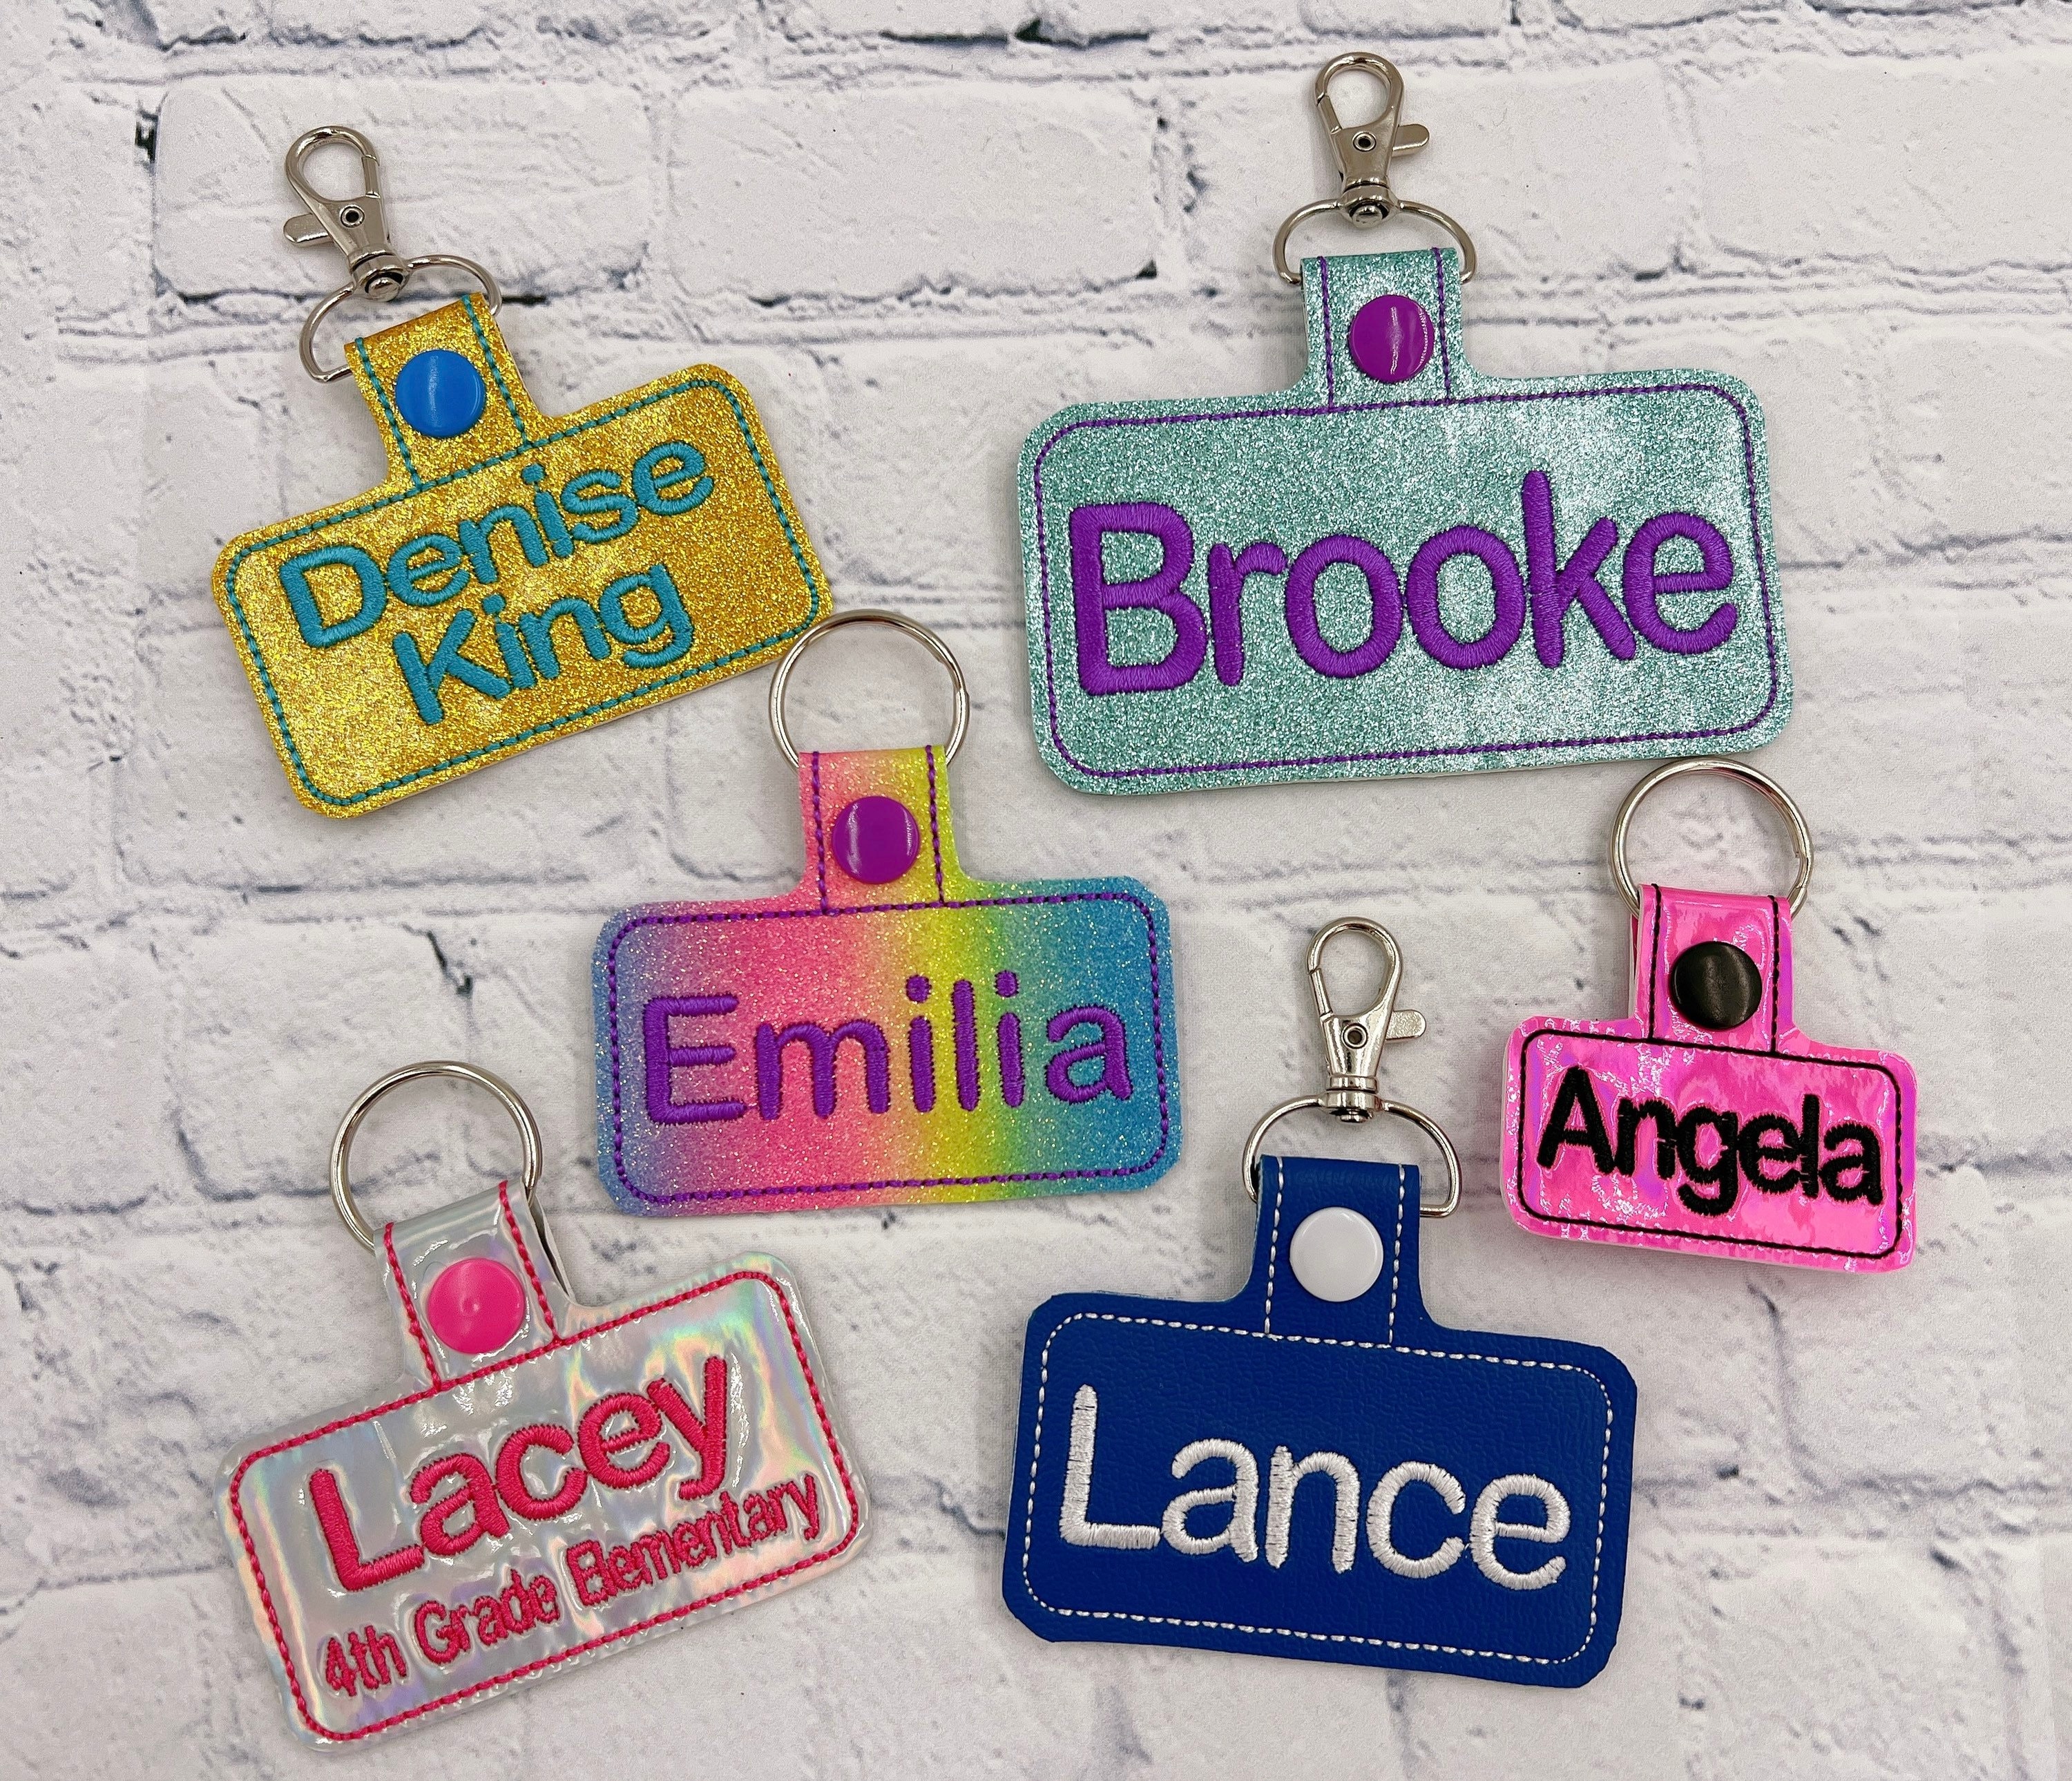 Personalized Name Patch, Custom Name Patch, Iron on Patch, for Backpacks,  Jackets, Lunch Bags 